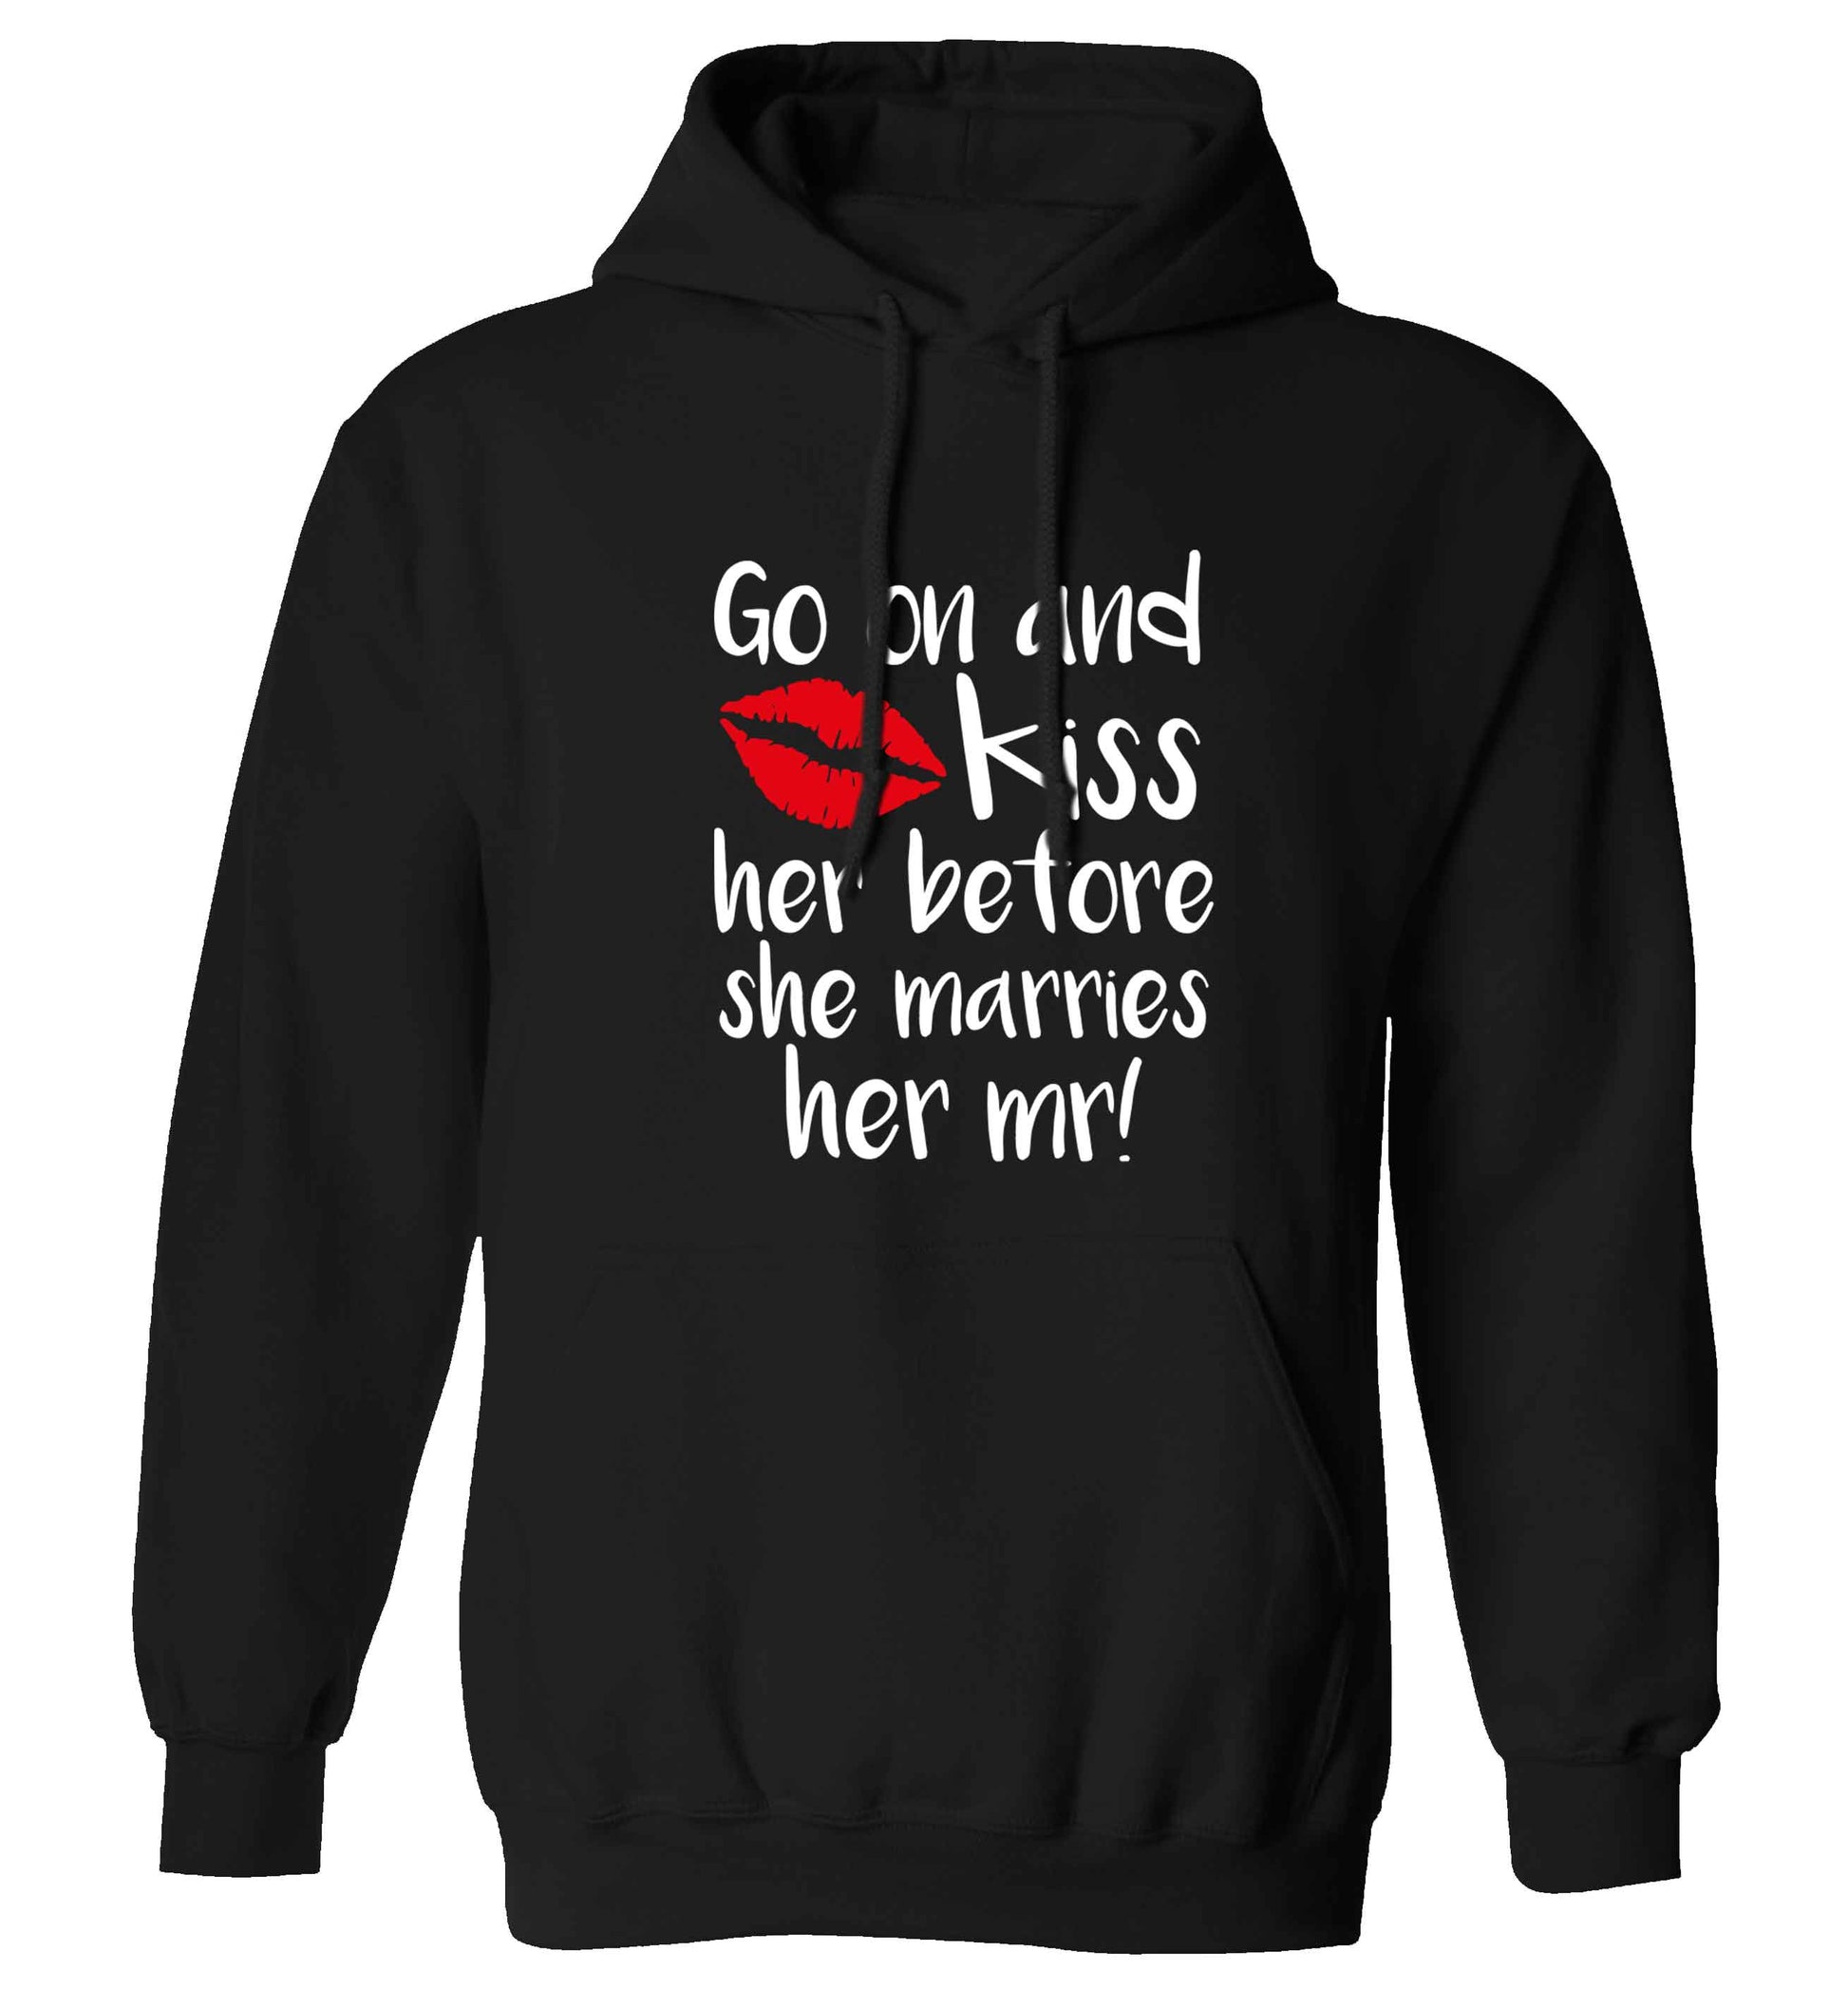 Kiss her before she marries her mr! adults unisex black hoodie 2XL